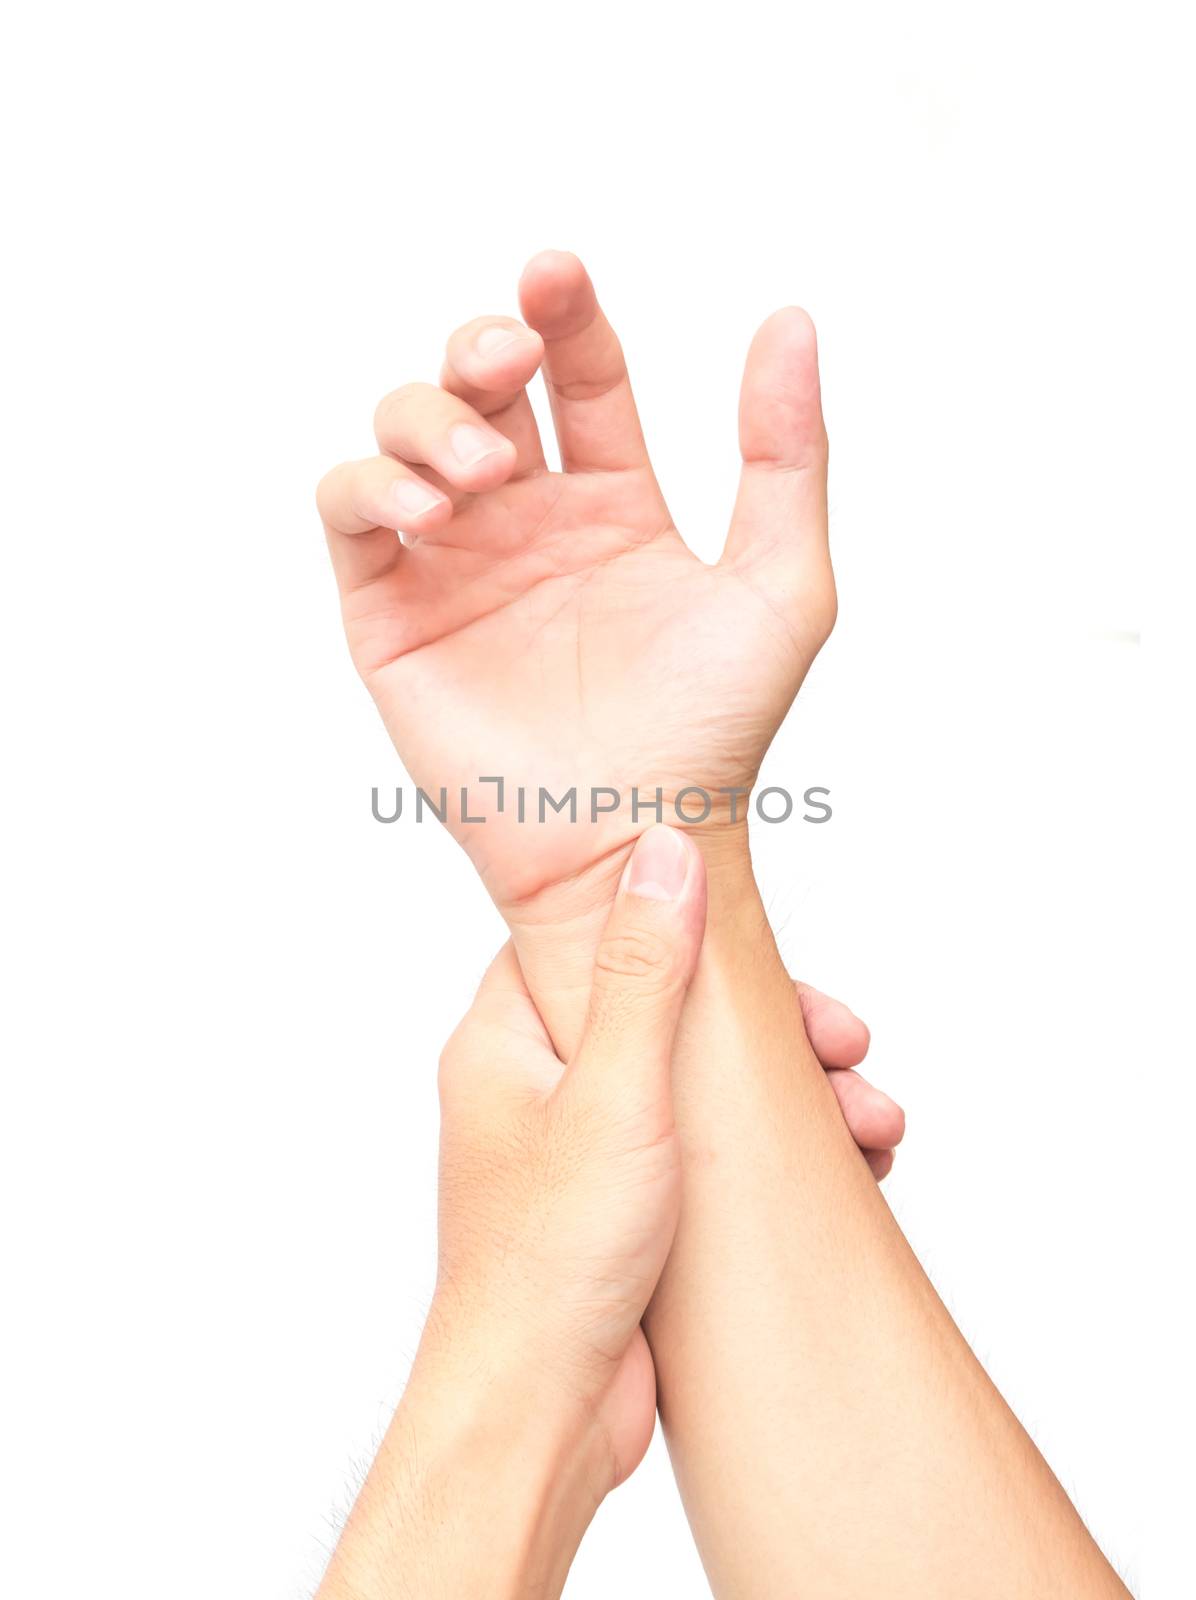 Man hand holding wrist with pain, health care and medical concept